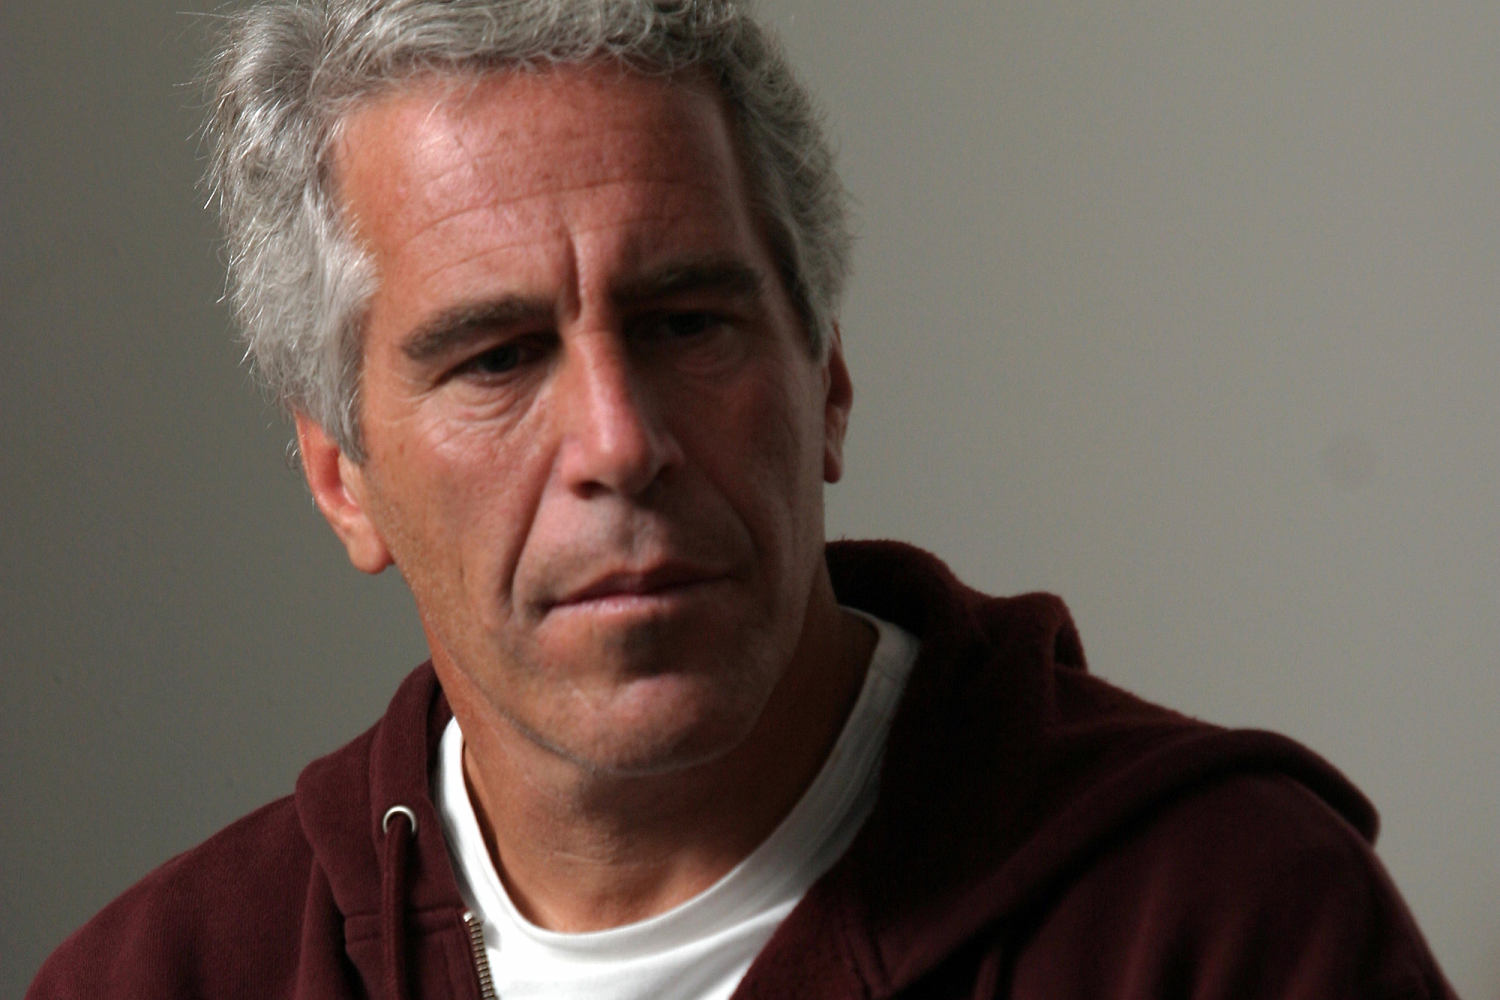 Names of Jeffrey Epstein associates and others to be unsealed in lawsuit documents